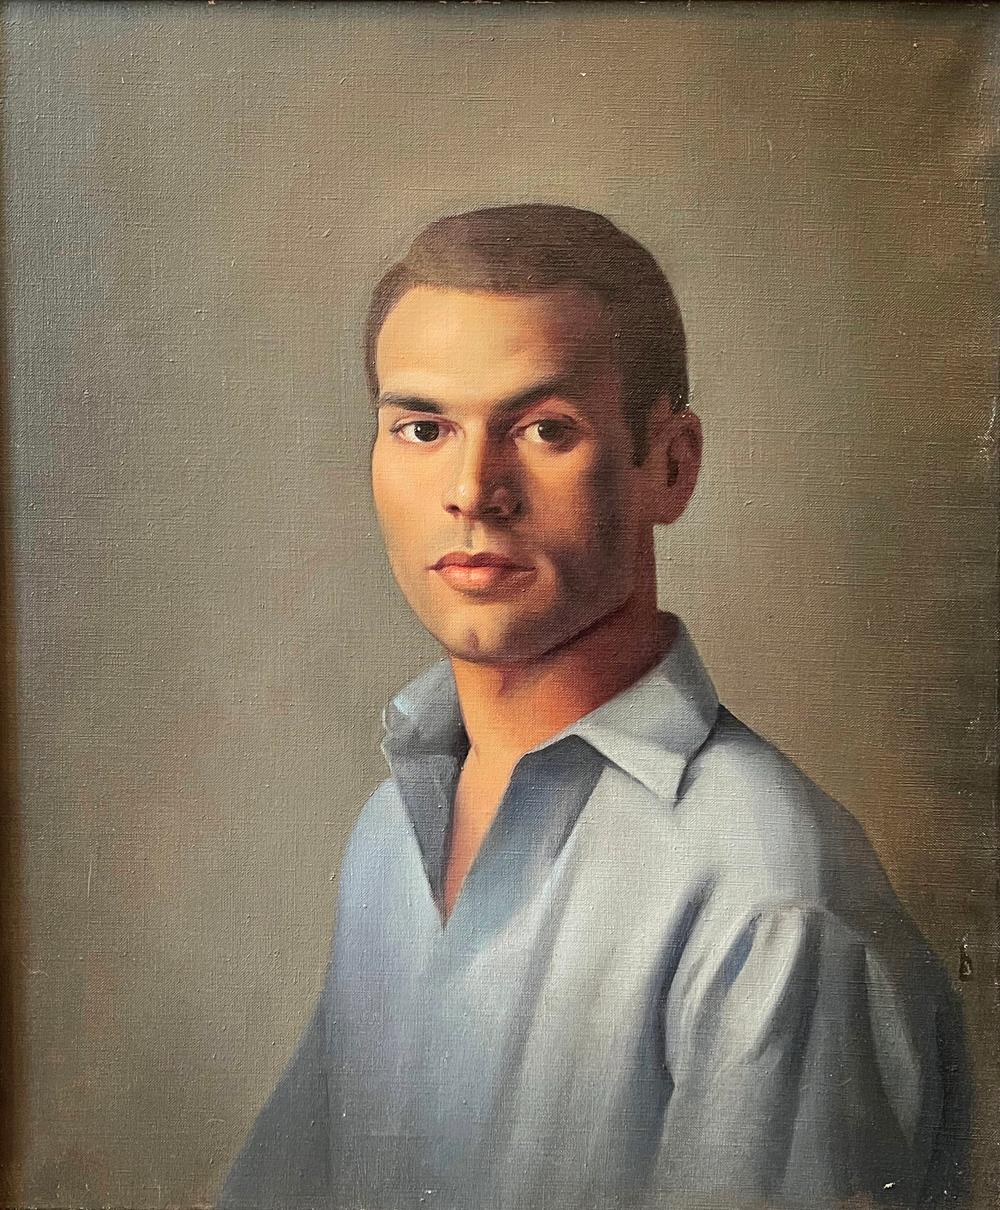 Painted by Luigi Lucioni, who was connected to the Paul Cadmus-Jared French-George Tooker circle in the 1920s and 30s before they became famous for their murals, photographs and easel paintings, this handsome portrait reportedly depicts Lucioni's